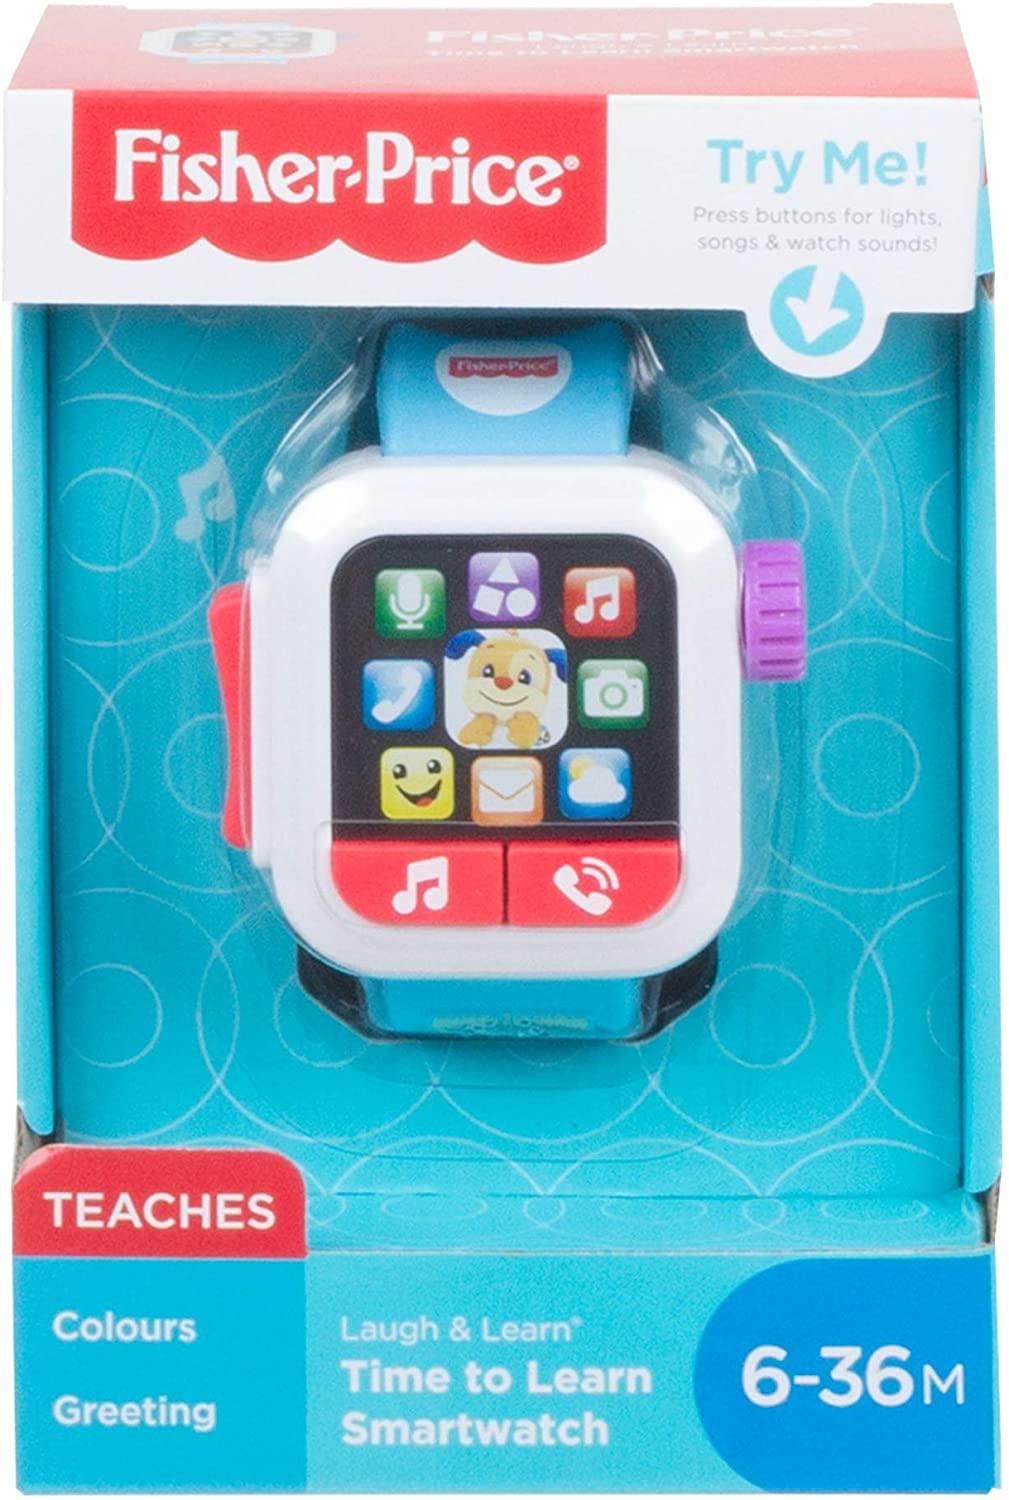 Fisher Price GMM44 Laugh & Learn Time to Learn Smartwatch Musical Baby Toy - Yachew